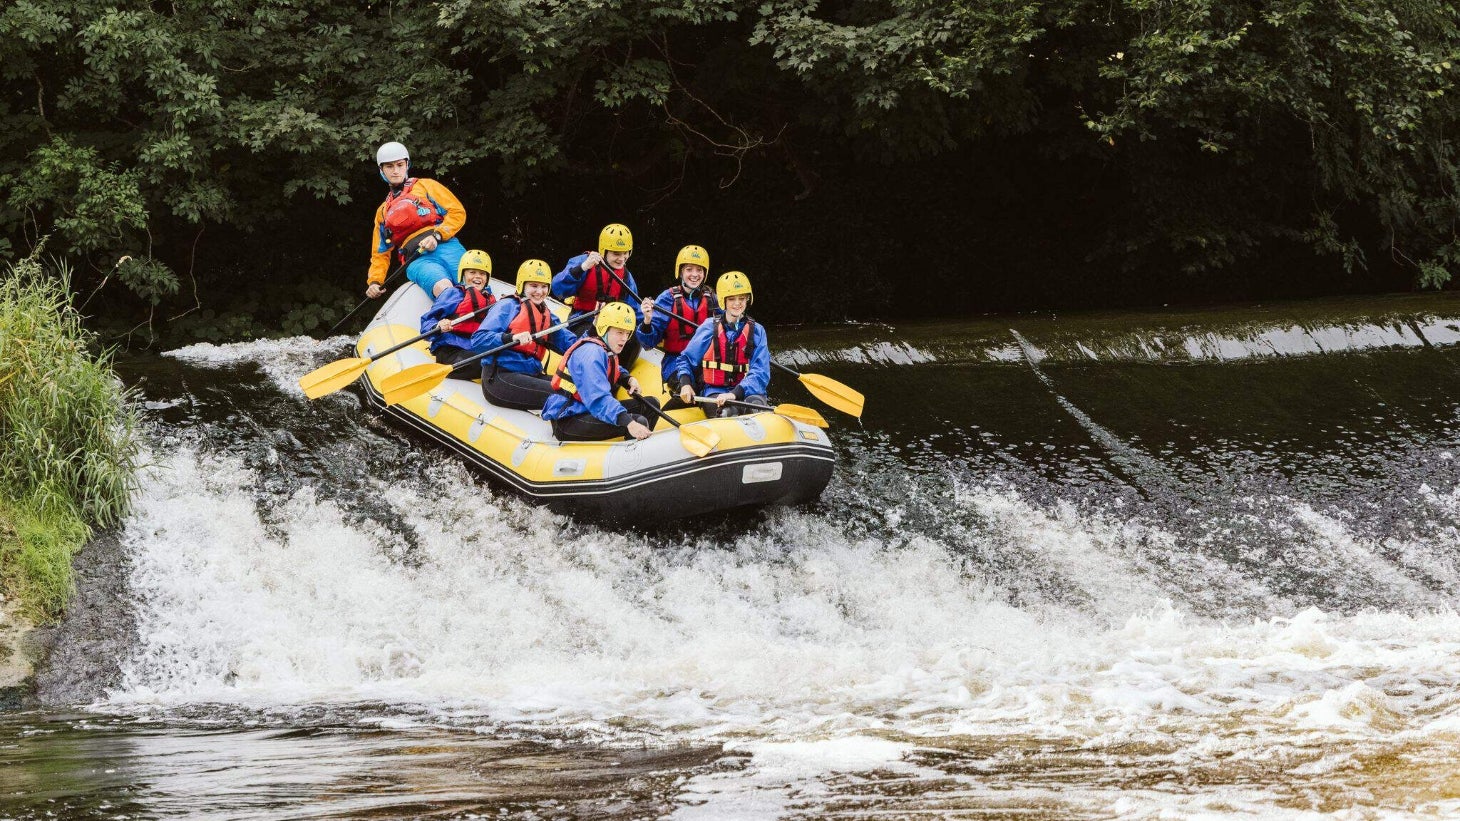 Rafting on the river Liffey